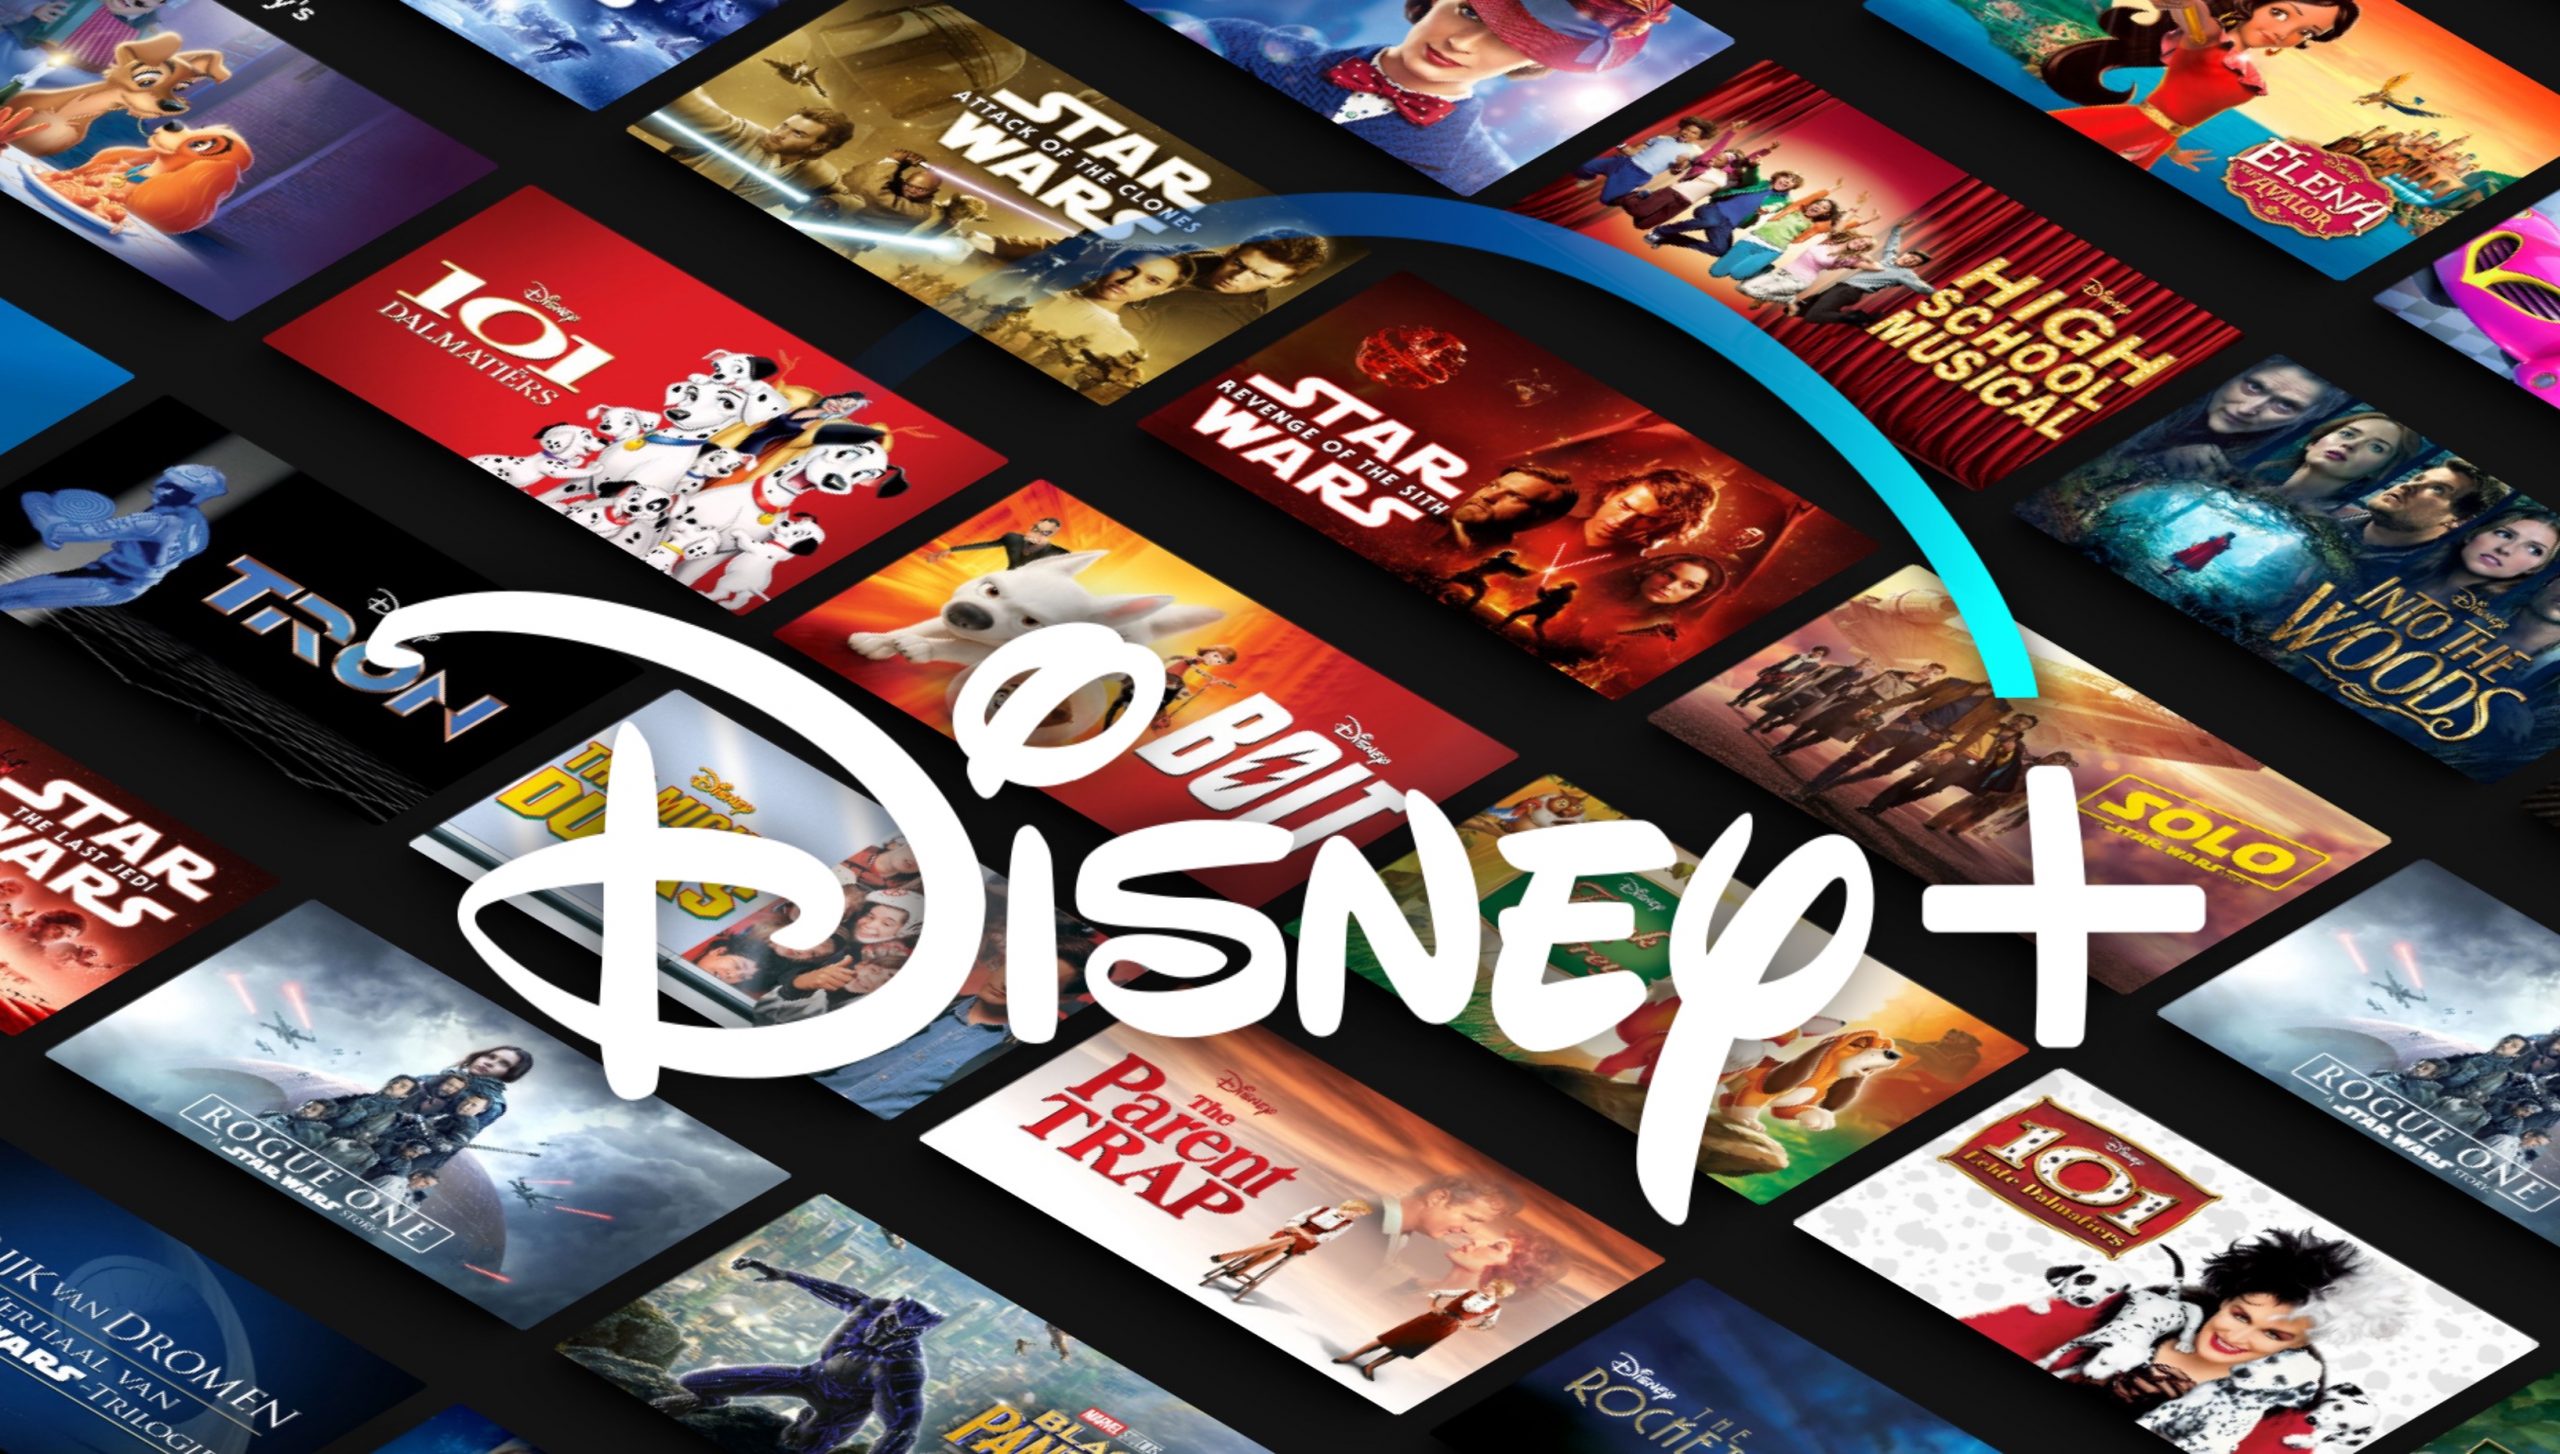 Disney+ Surpasses 50 Million Subscribers in Less Than 6 Months